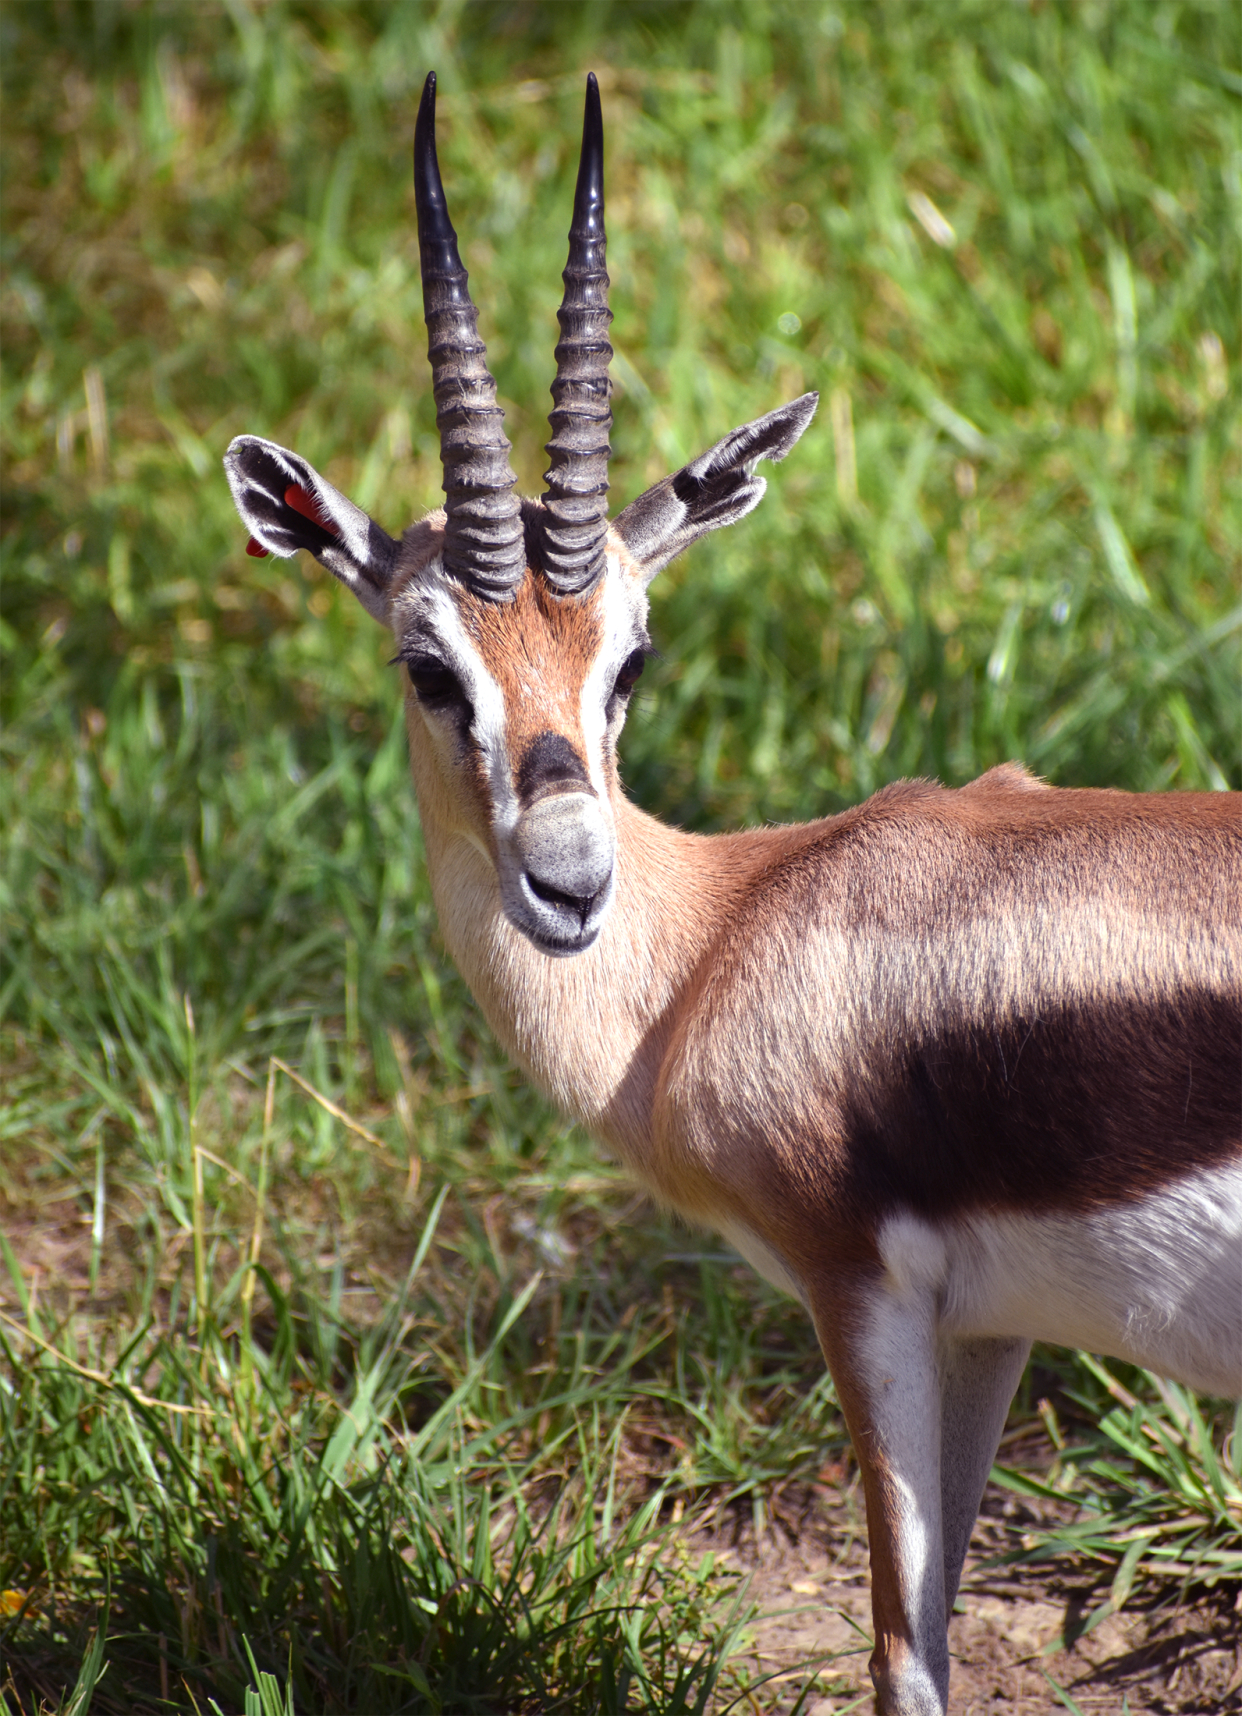 A Speke's gazelle at the Akron Zoo has died.